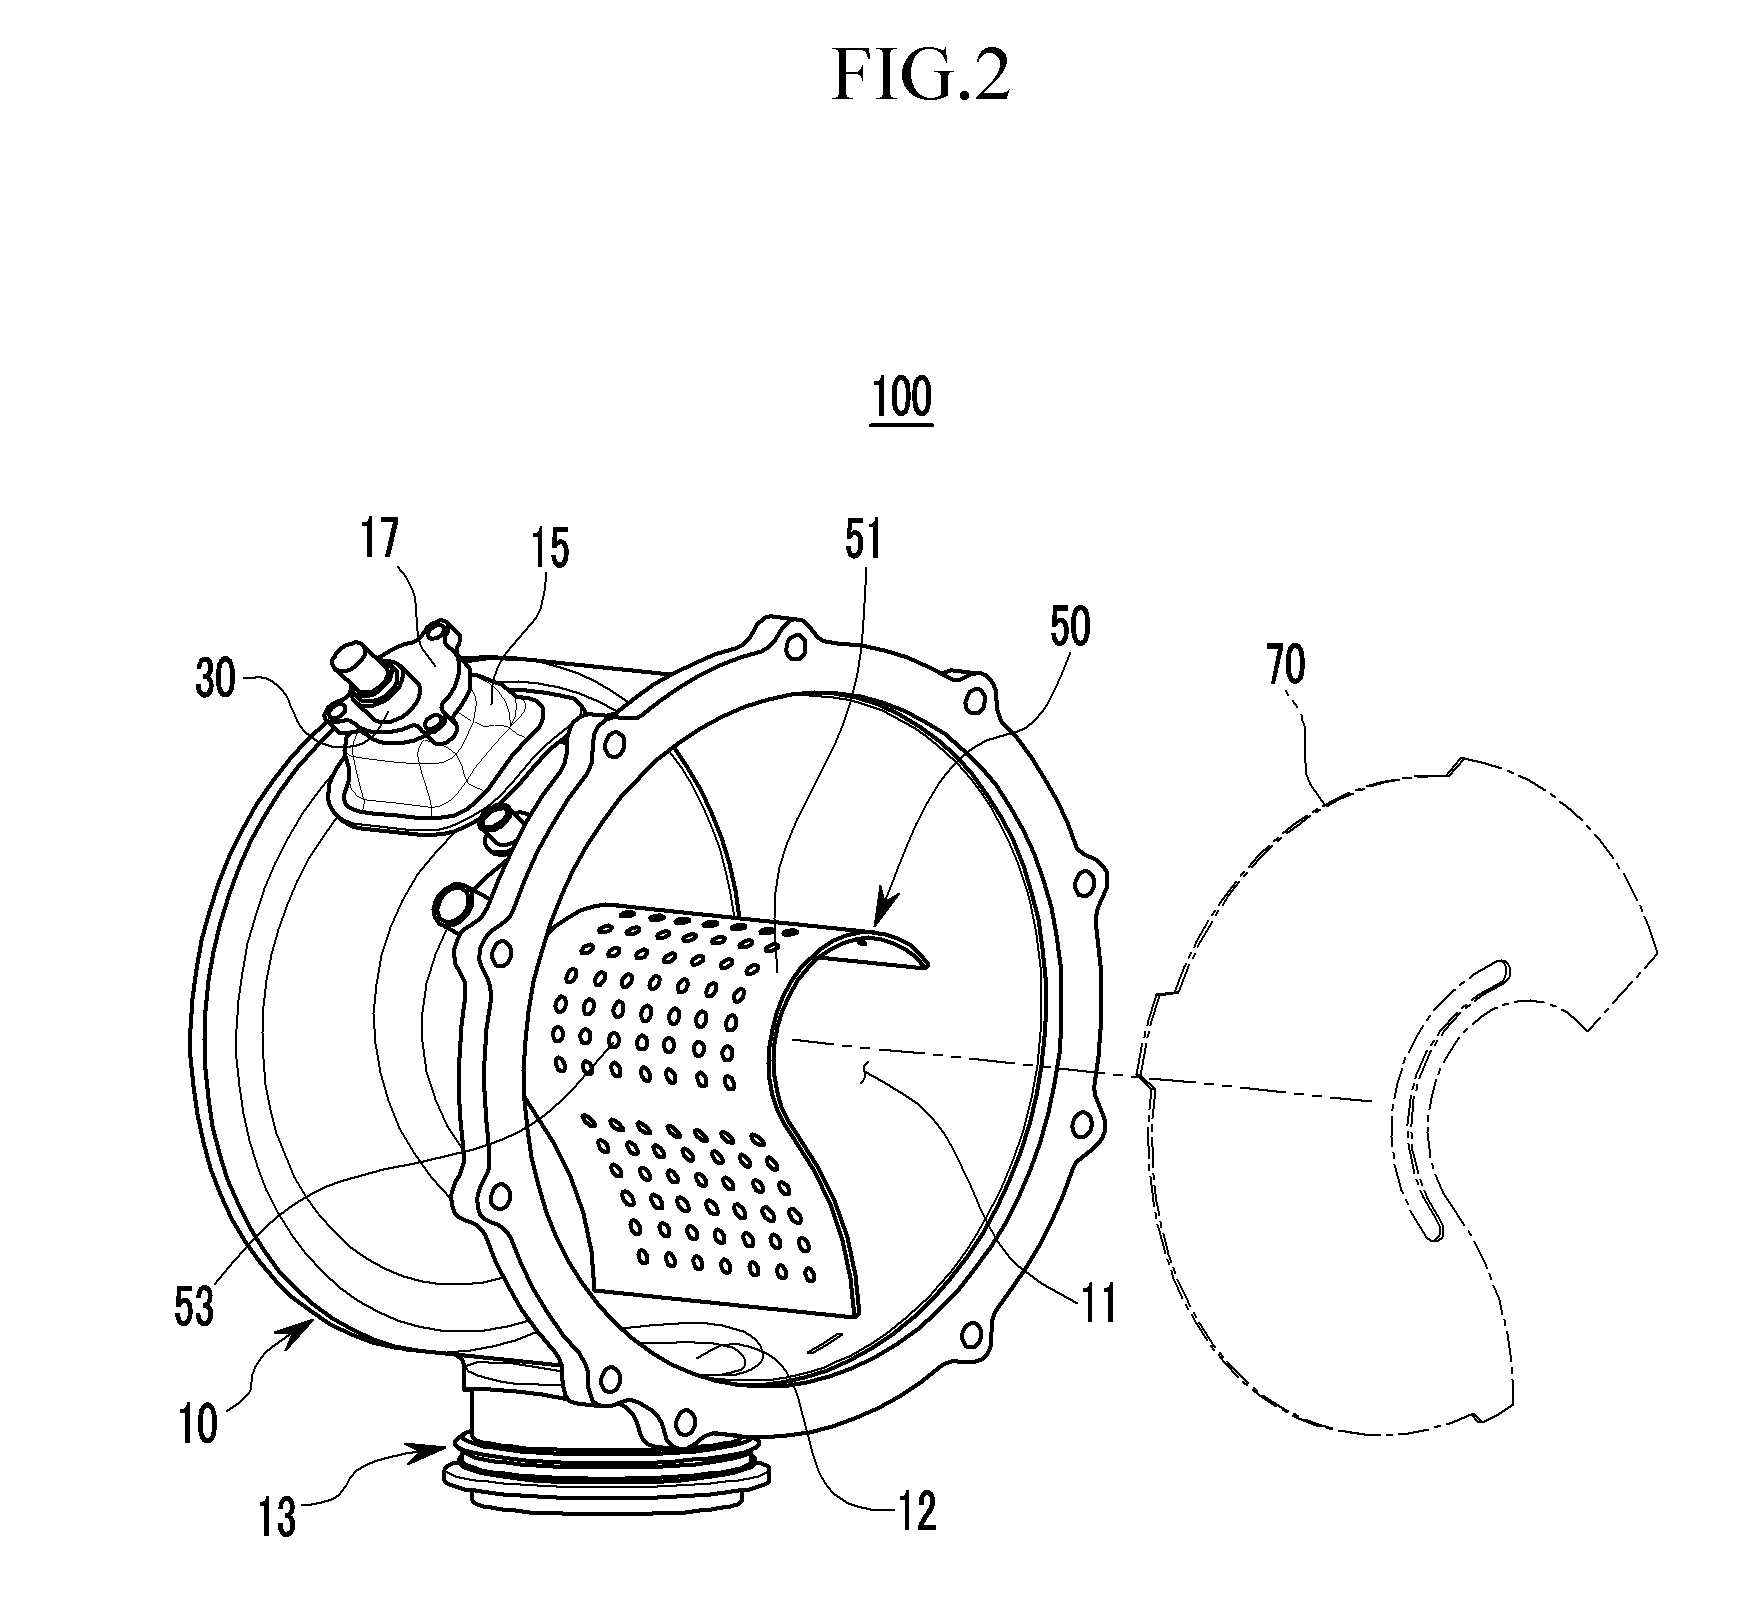 Dosing module for exhaust post treatment system of vehicle